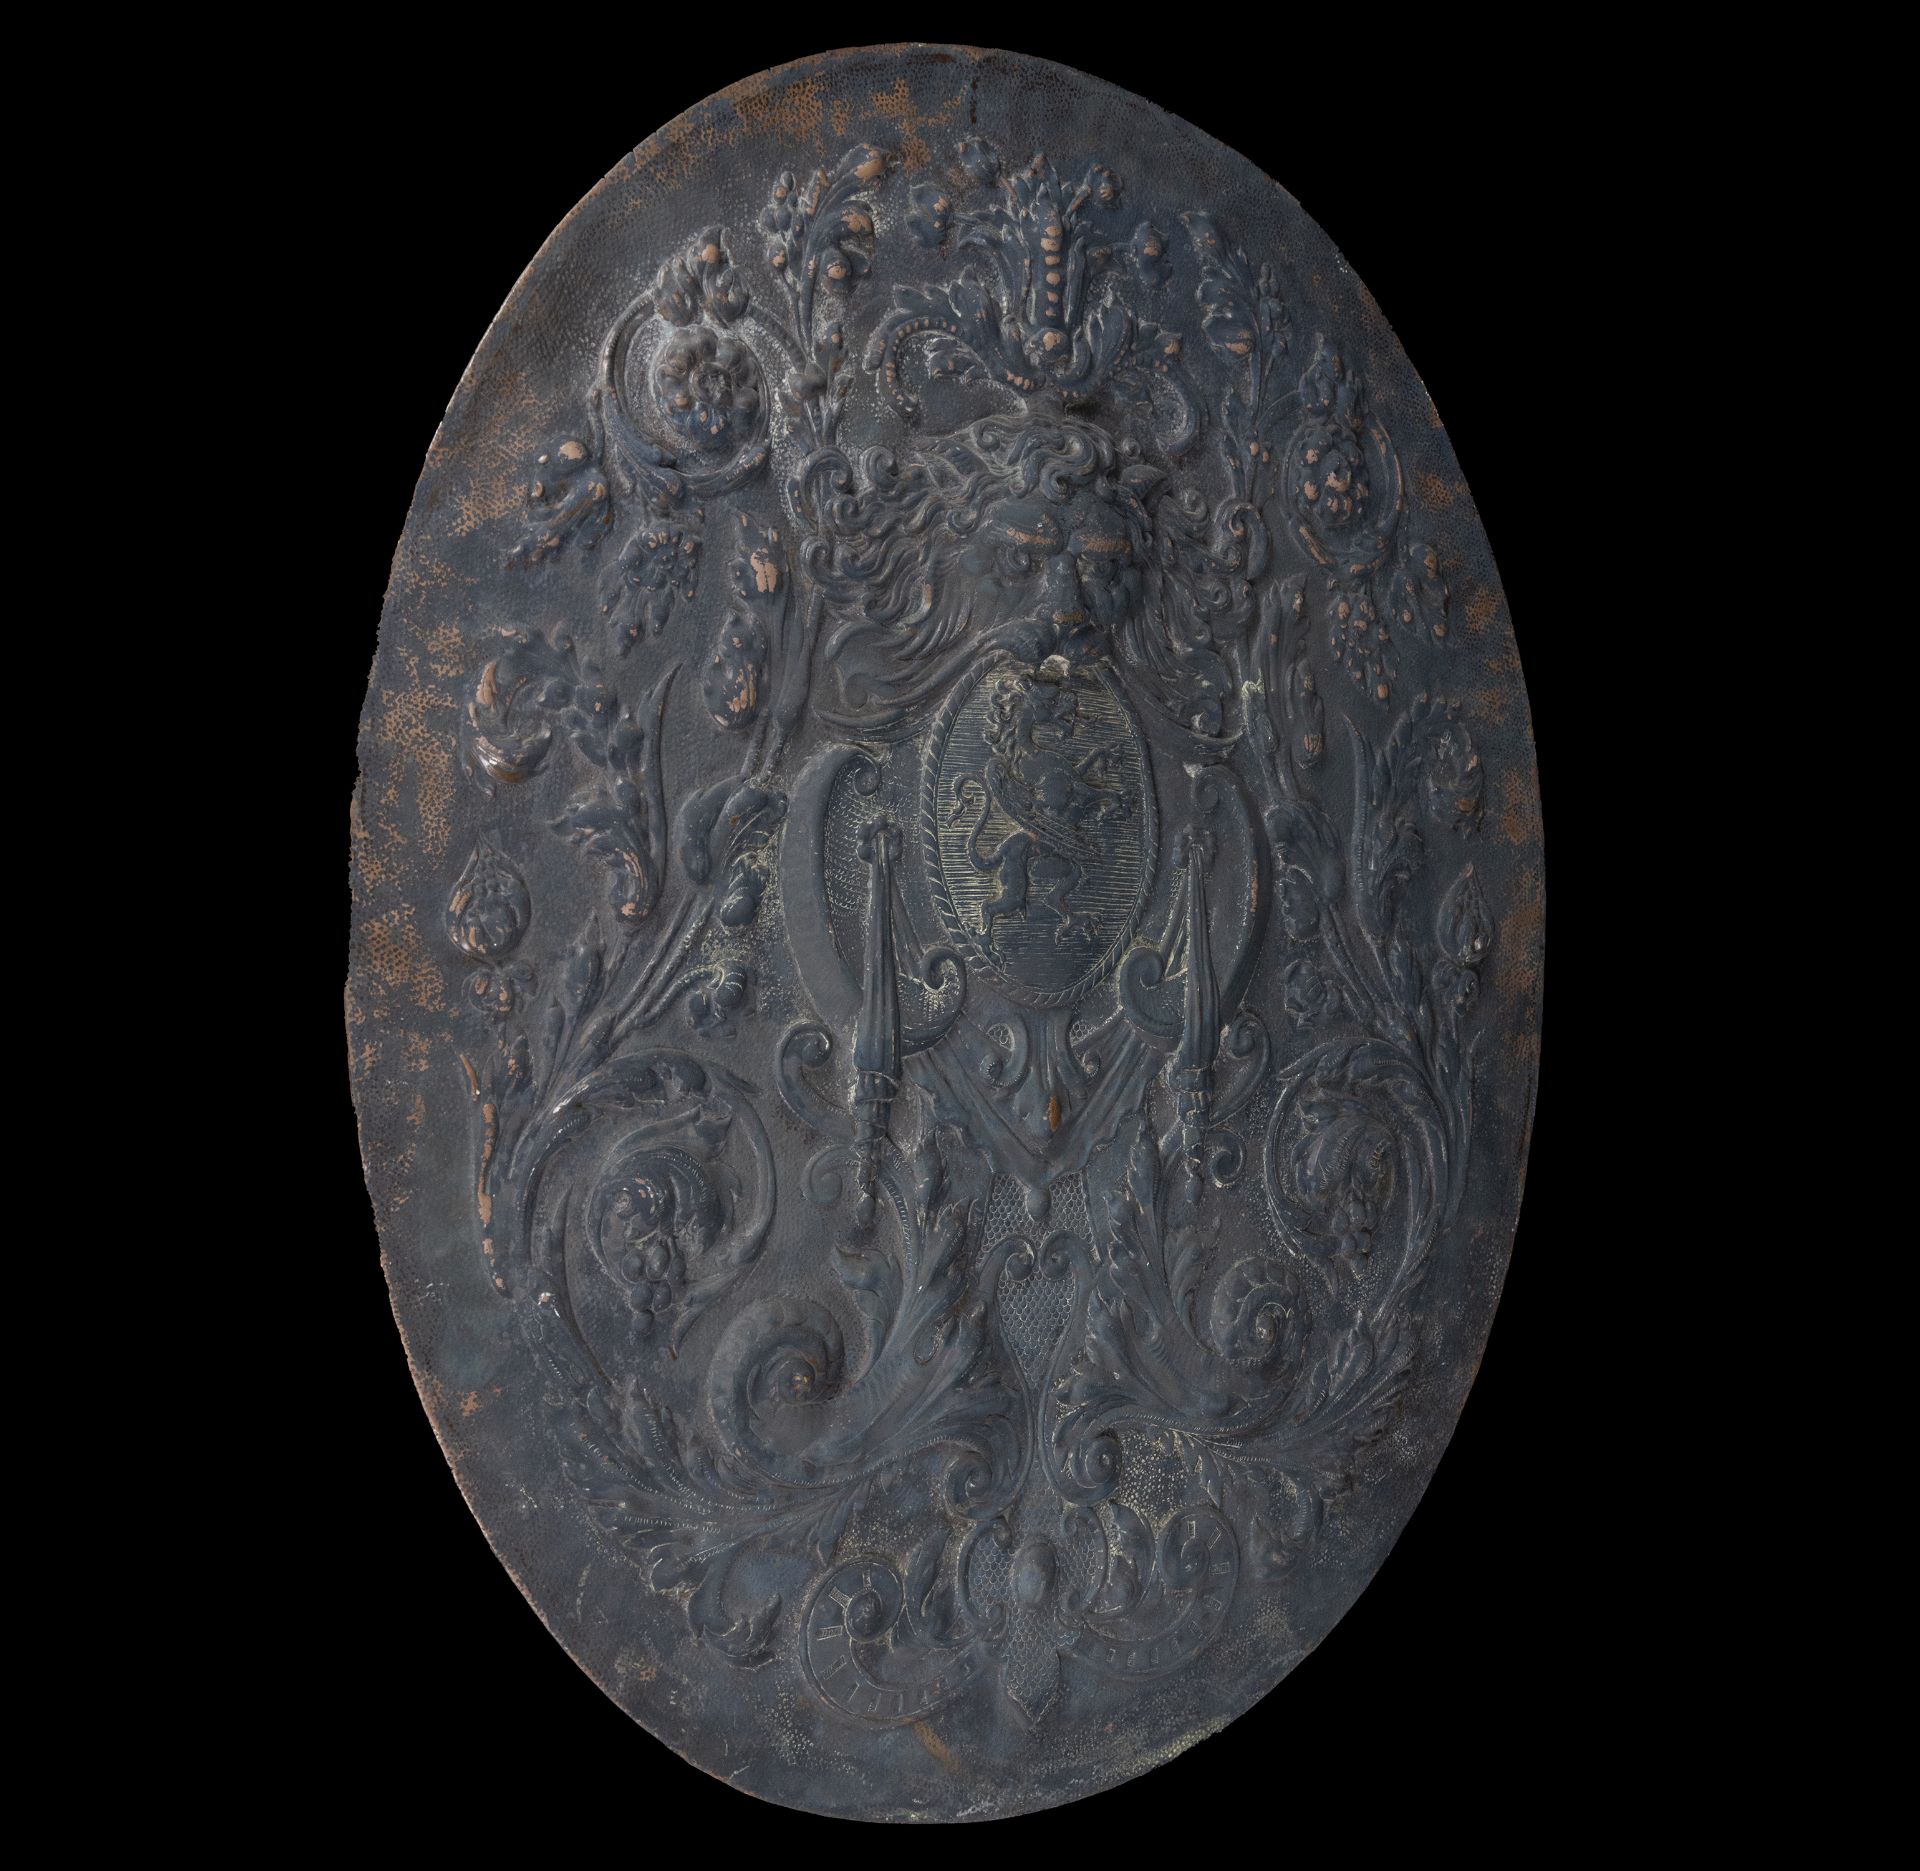 19th century embossed copper shield